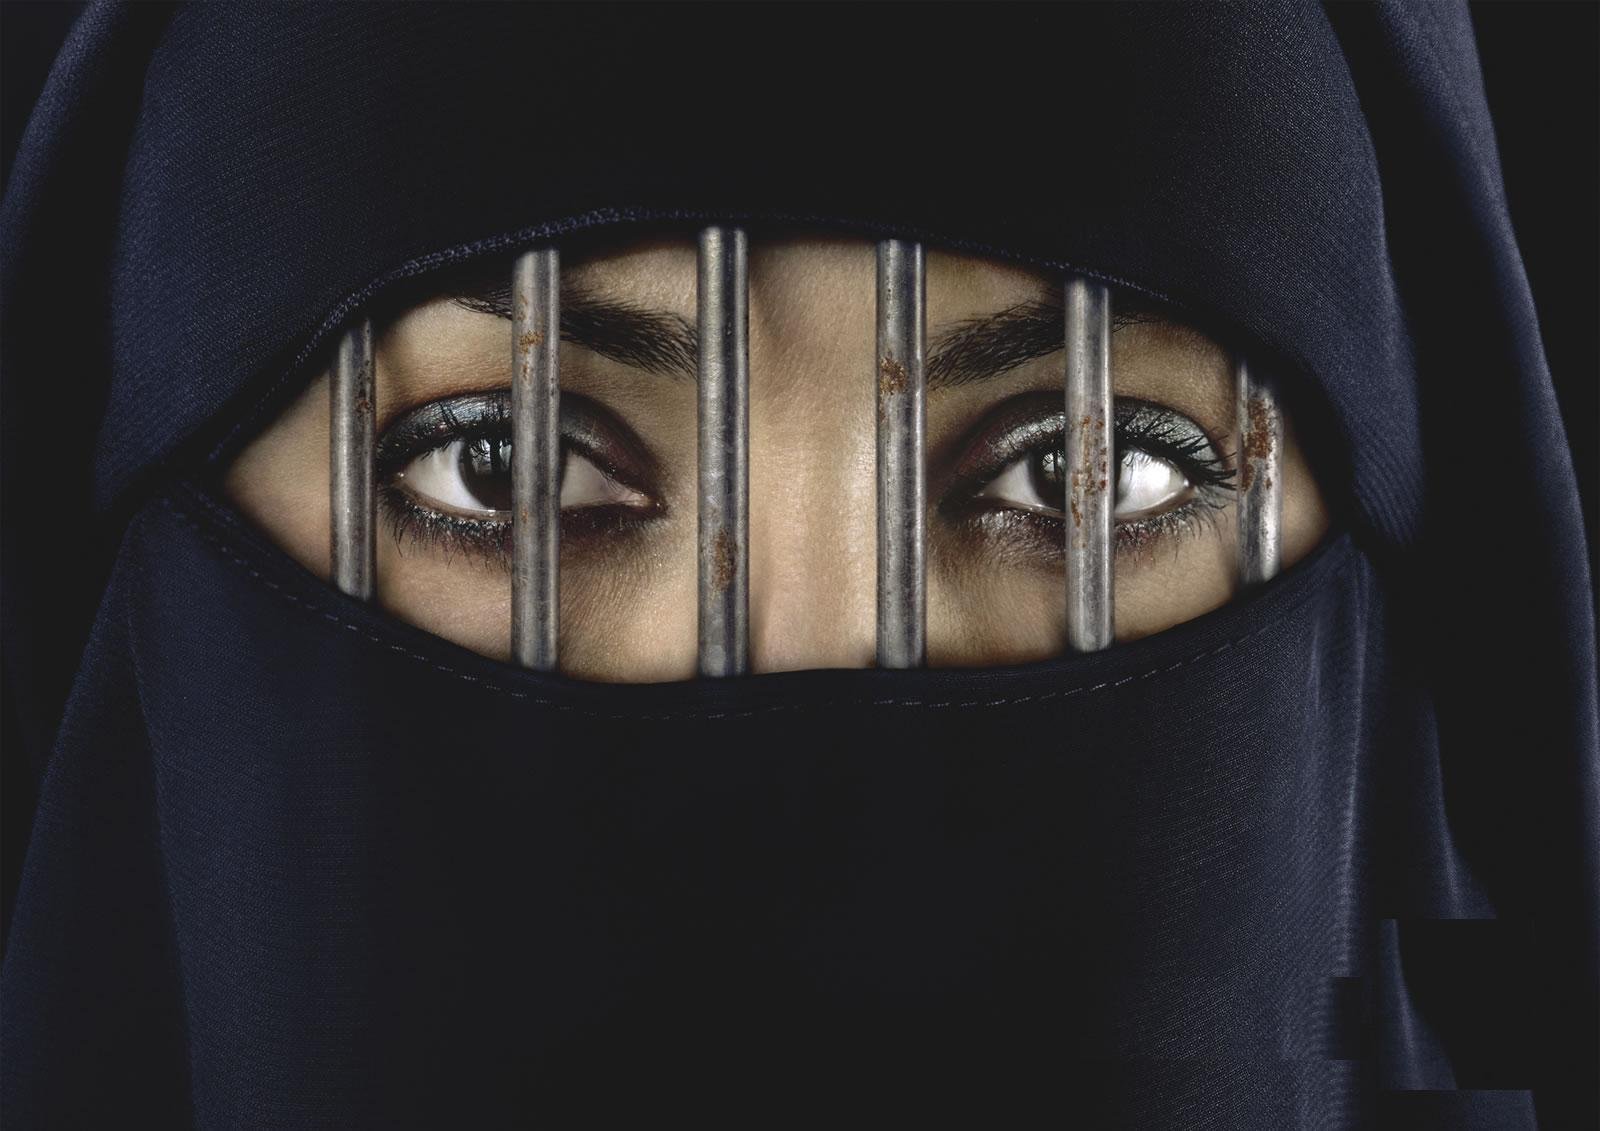 Is It Wrong to Assume Arab Countries Violate Women’s Rights?